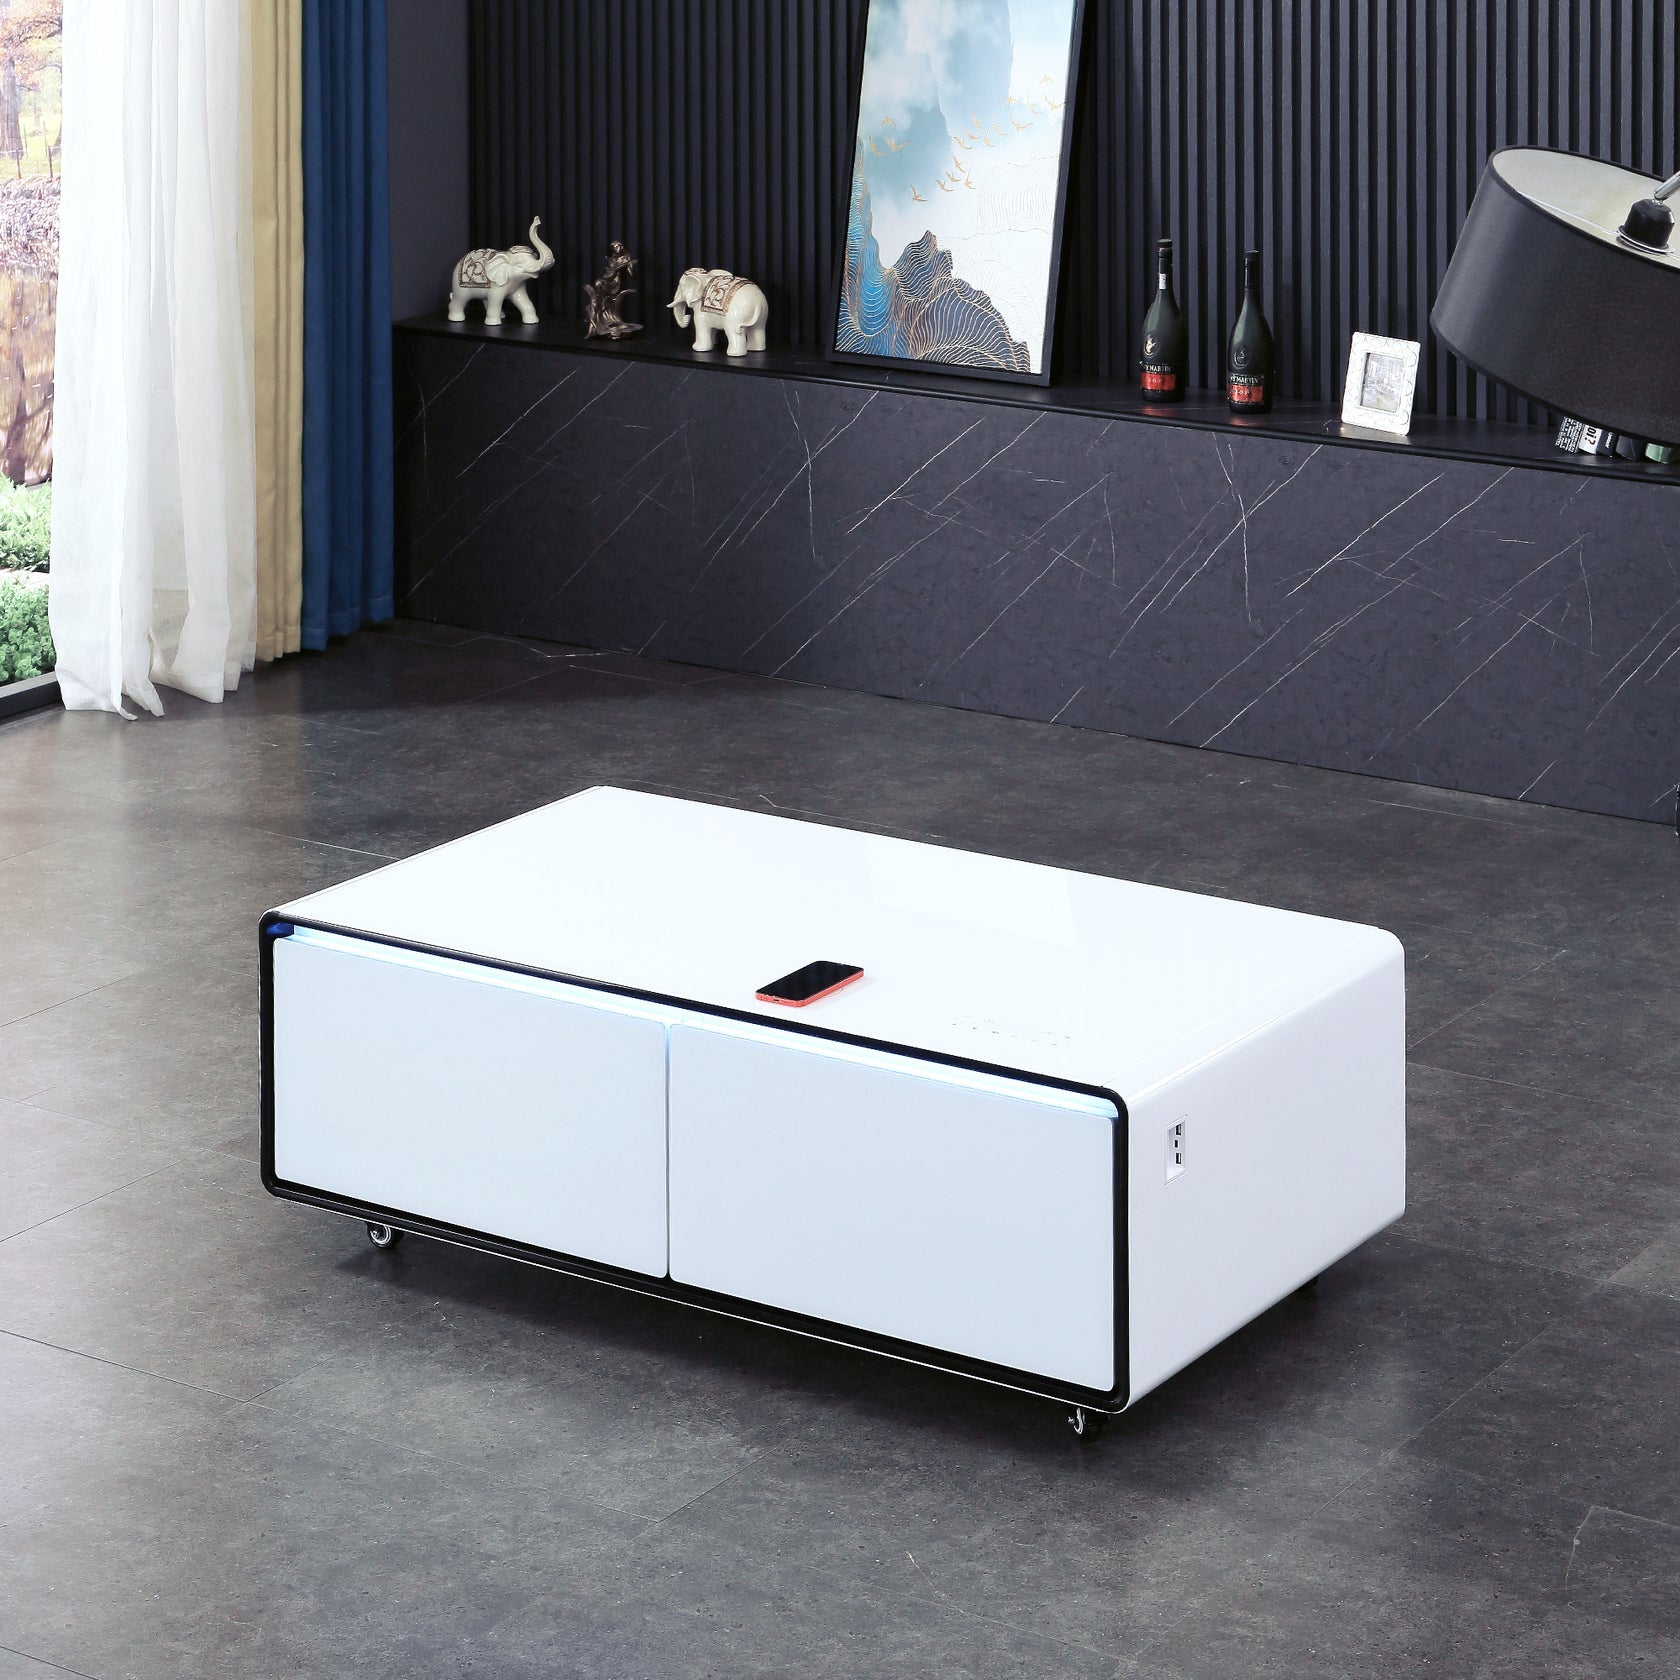 Artisan Framhild Coffee Table with Fridge and Bluetooth Speakers White 2